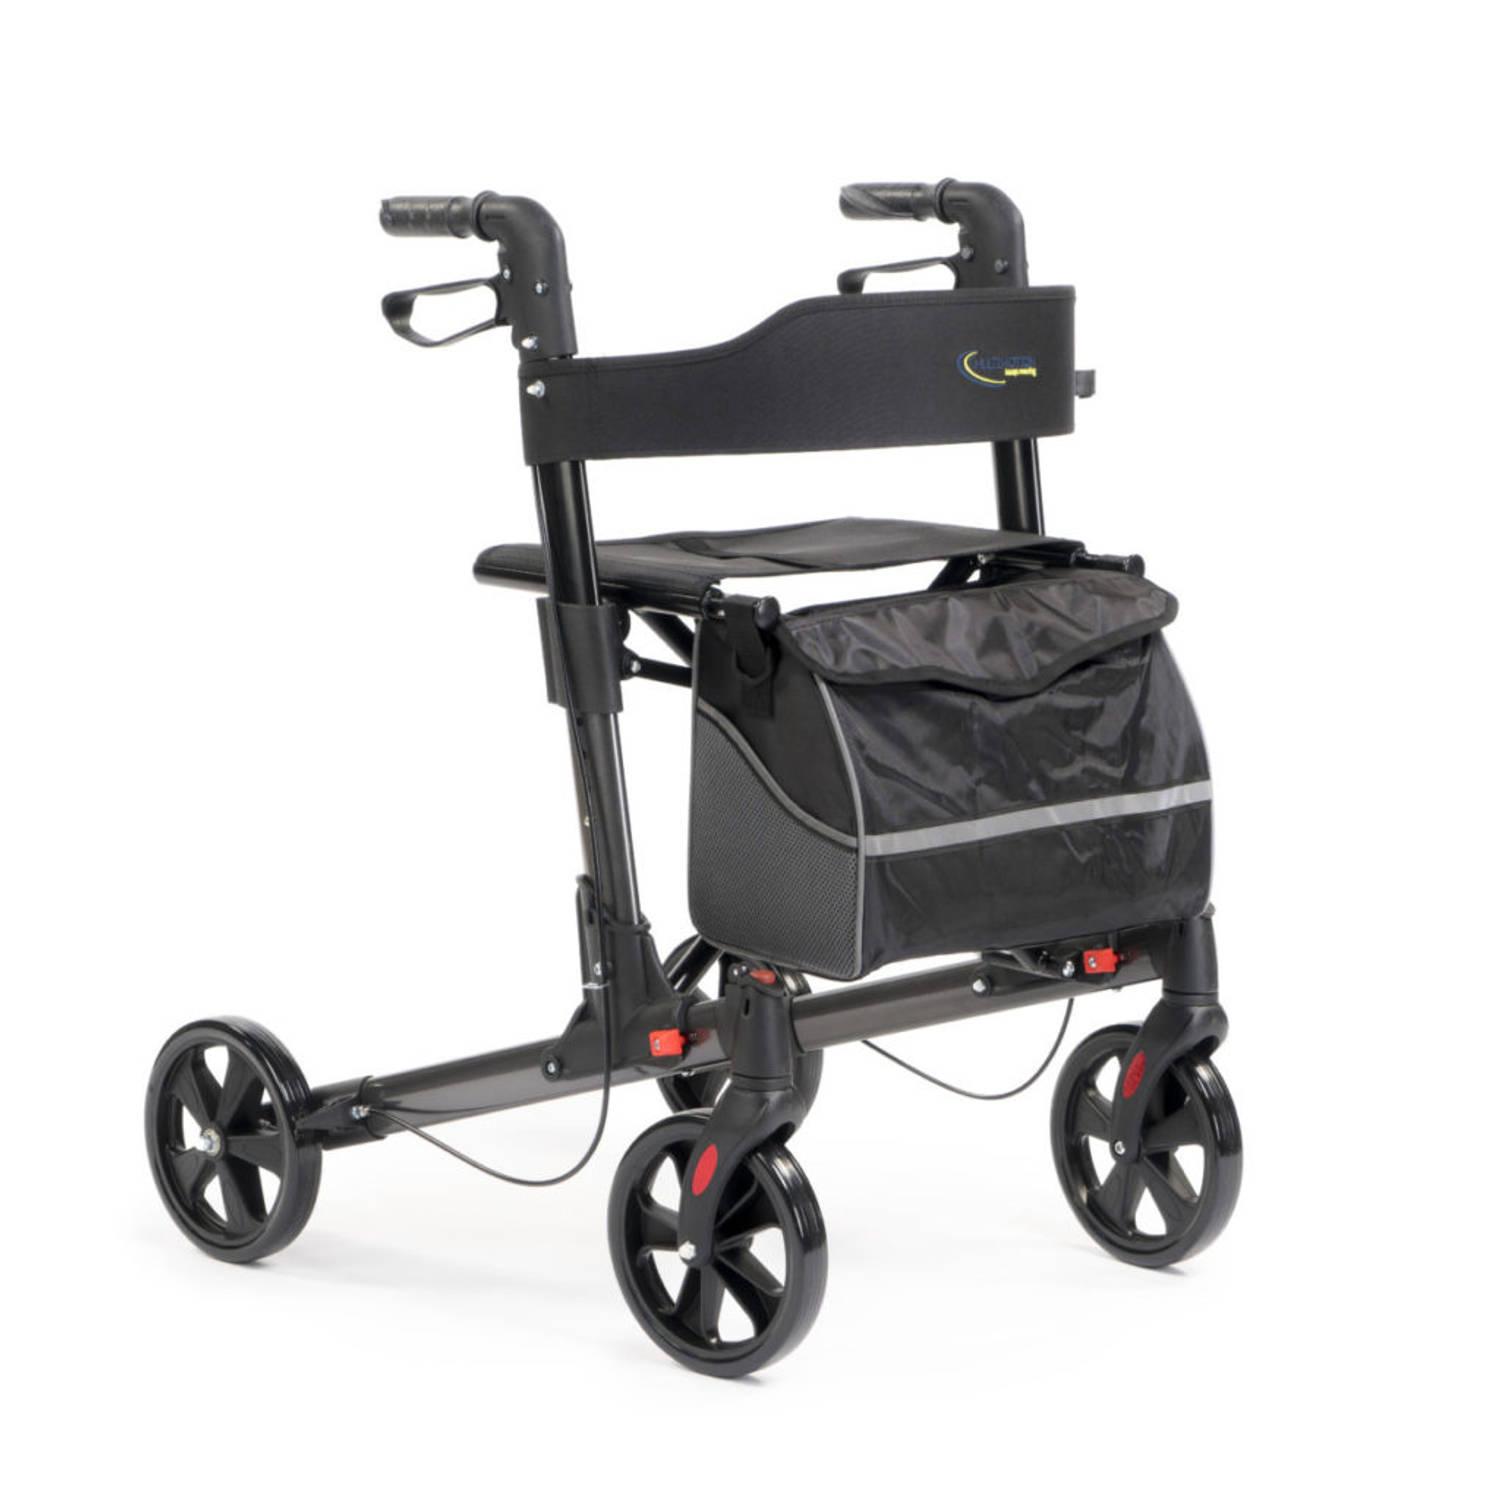 MultiMotion Double rollator